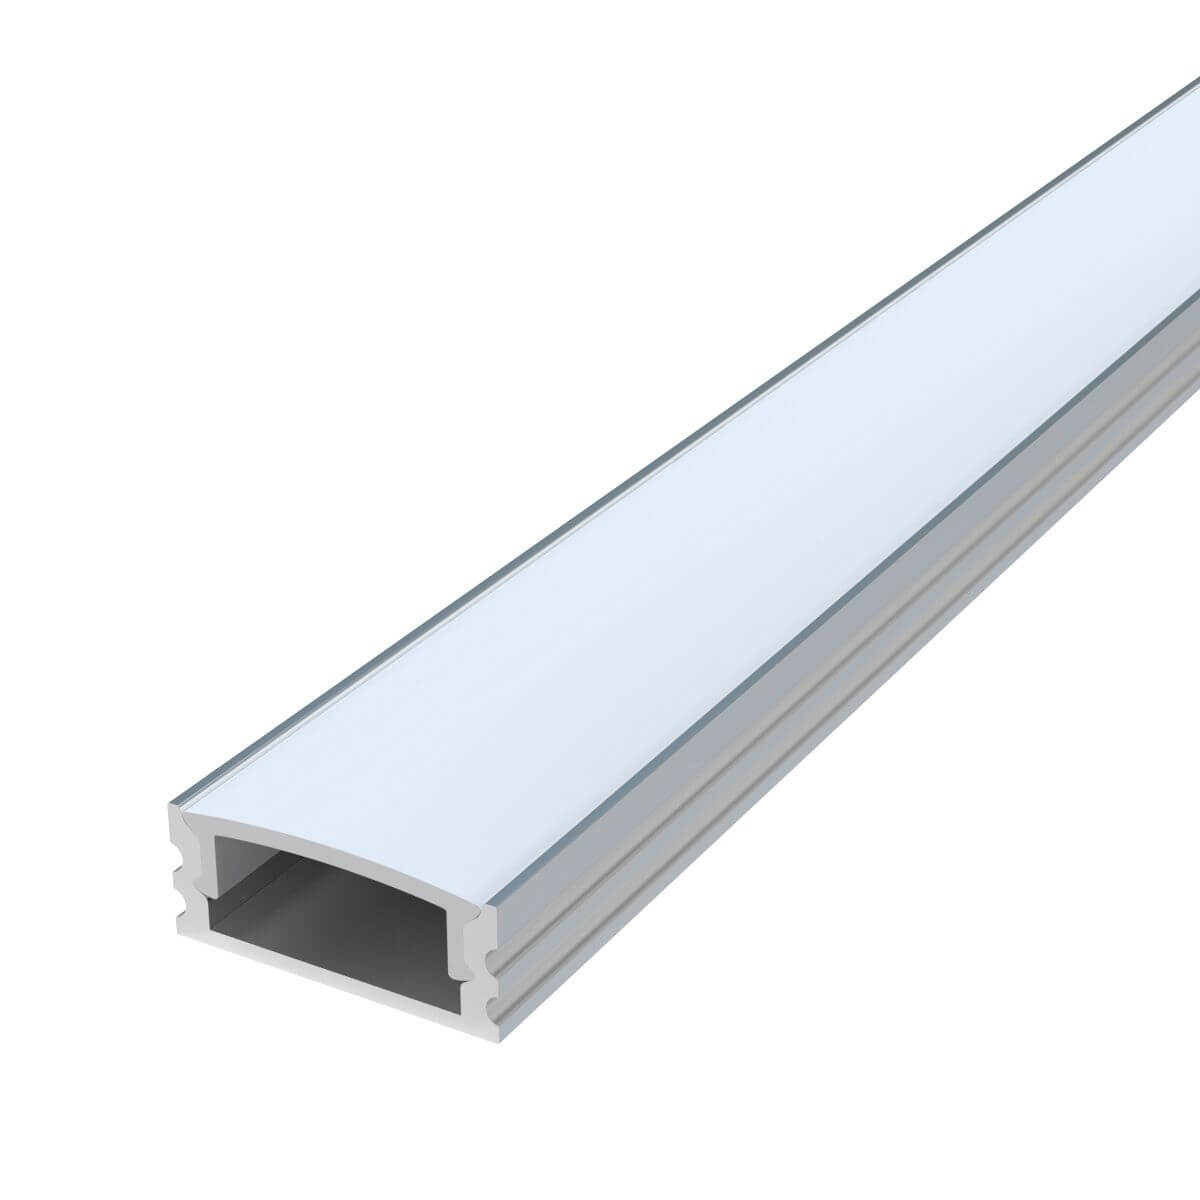 View 2m Shallow 7mm Surface Mounted LED Aluminium Profile information